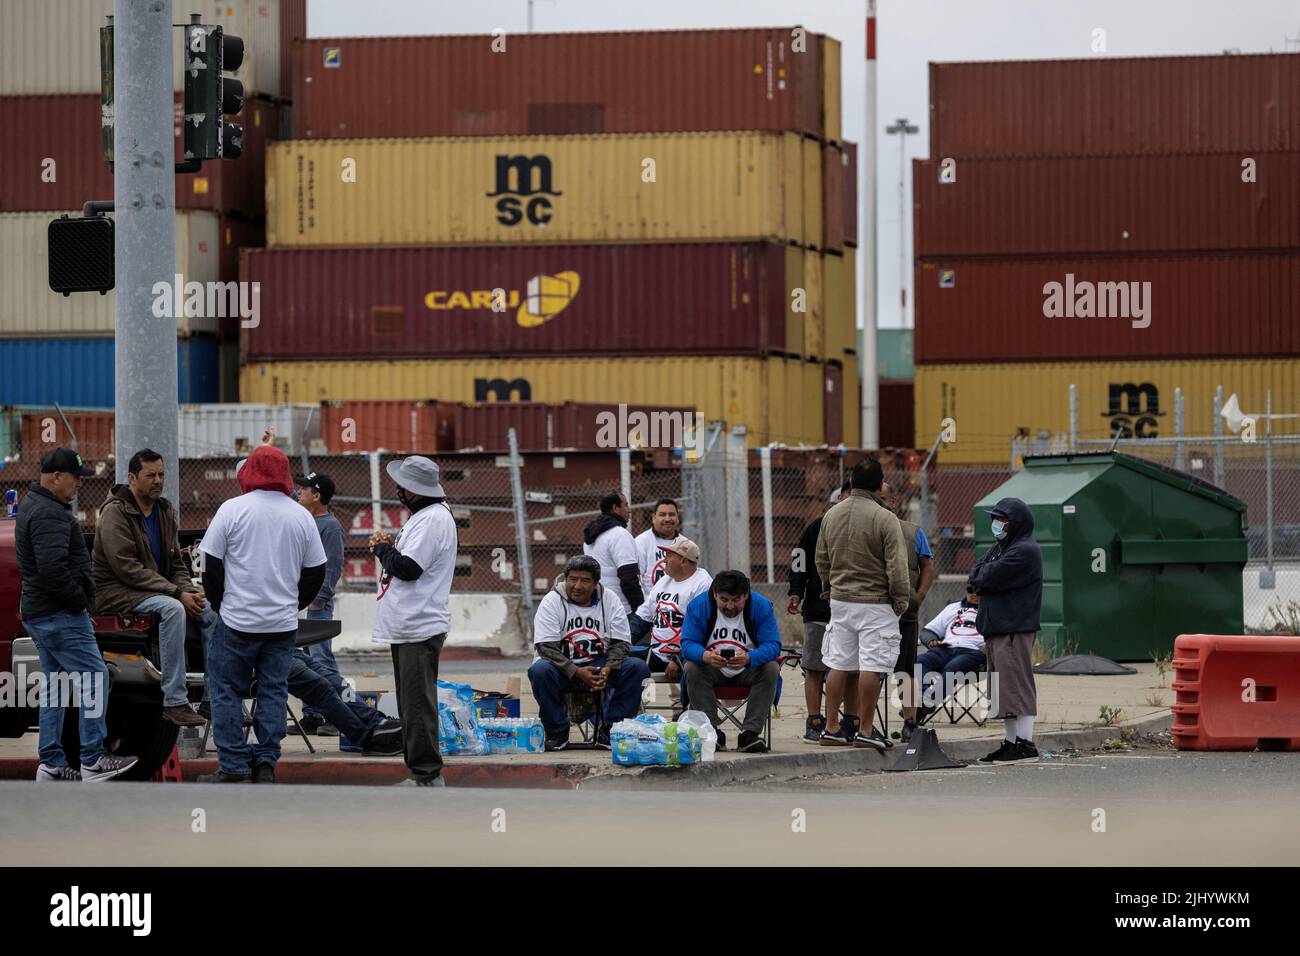 Truck drivers gather to block the entrance of trucks at a container terminal at the Port of Oakland, during a protest against California's law known as AB5, in Oakland, California, July 21, 2022. REUTERS/Carlos Barria Stock Photo